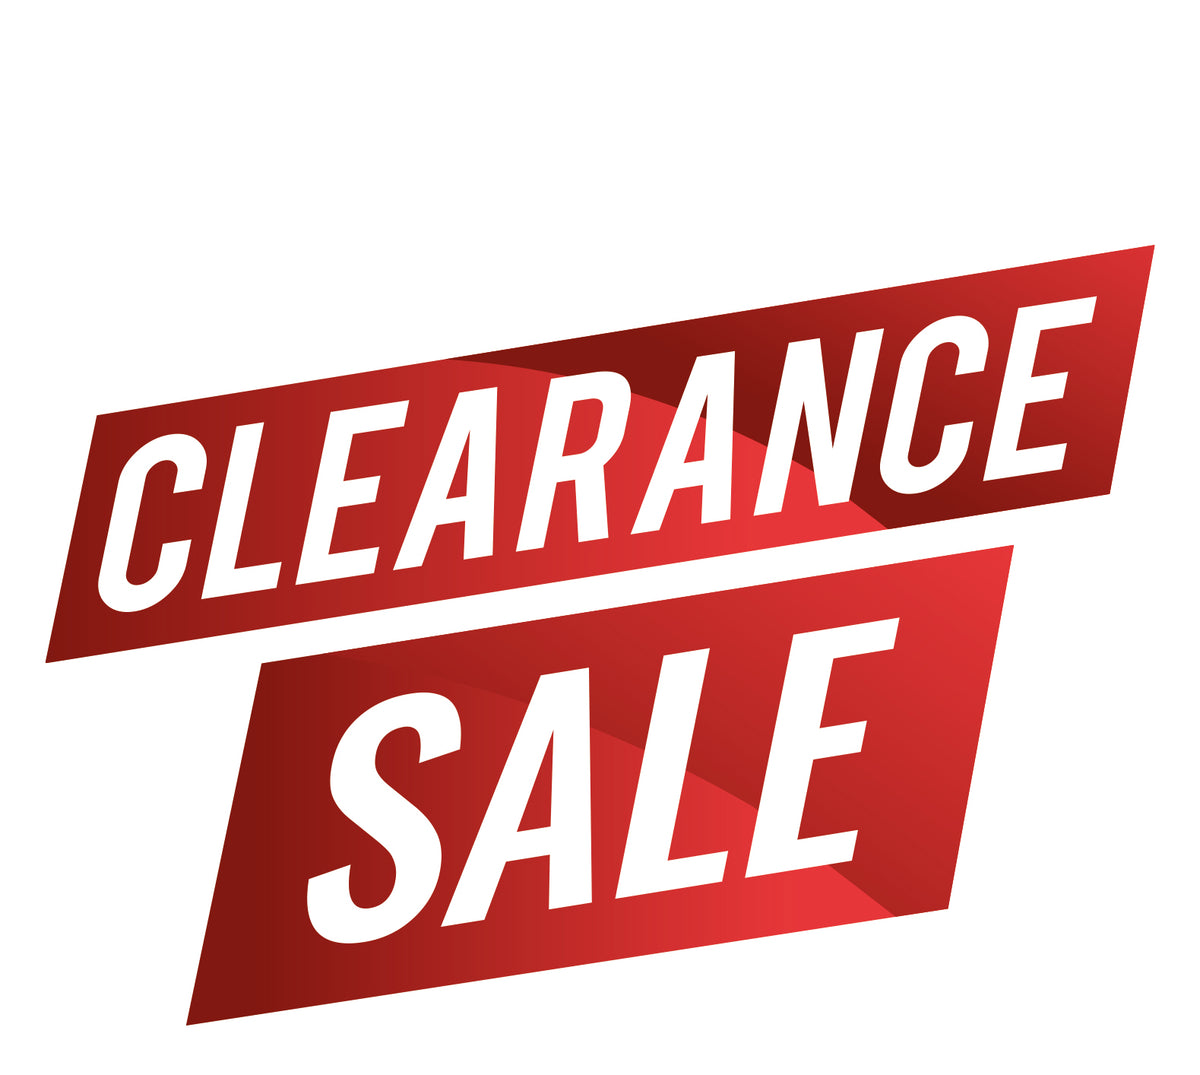 Clearance – Exposed Signage and Apparel